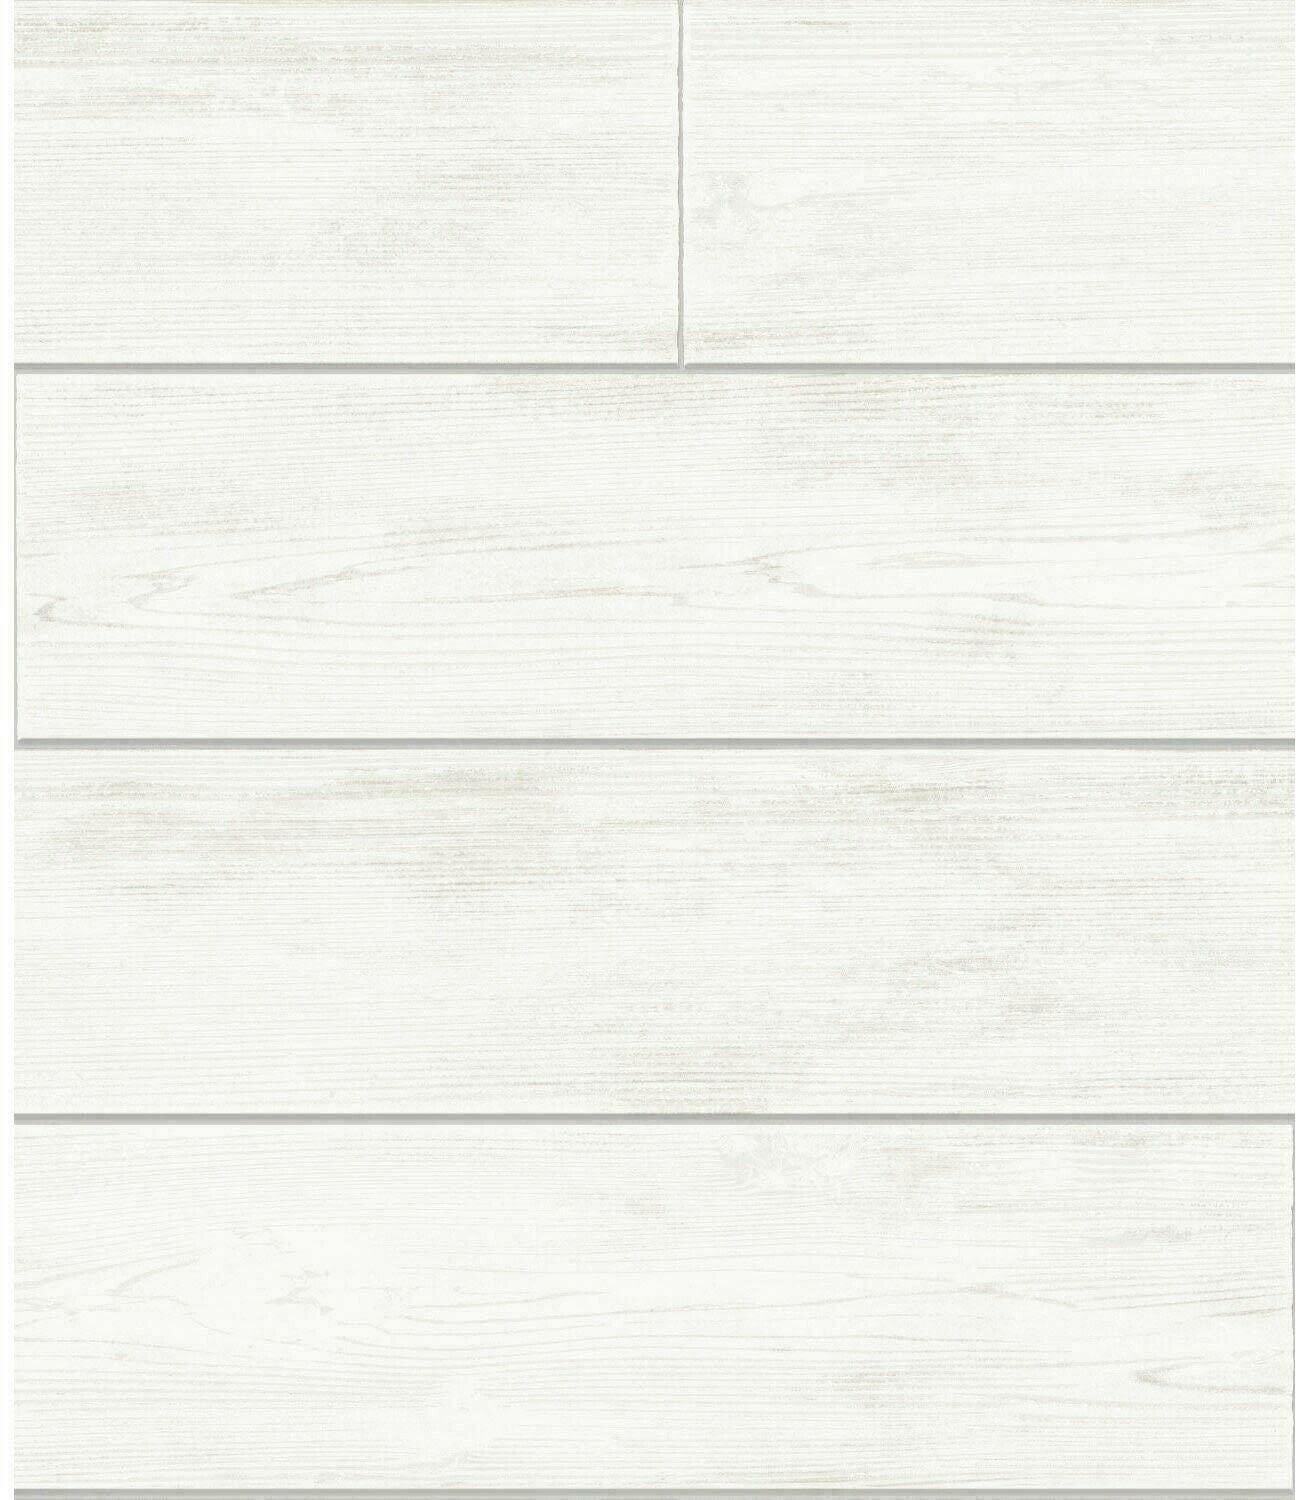 Magnolia Home Joanna Gaines Off White Shiplap Wood On Sure Strip Wallp All 4 Walls Wallpaper